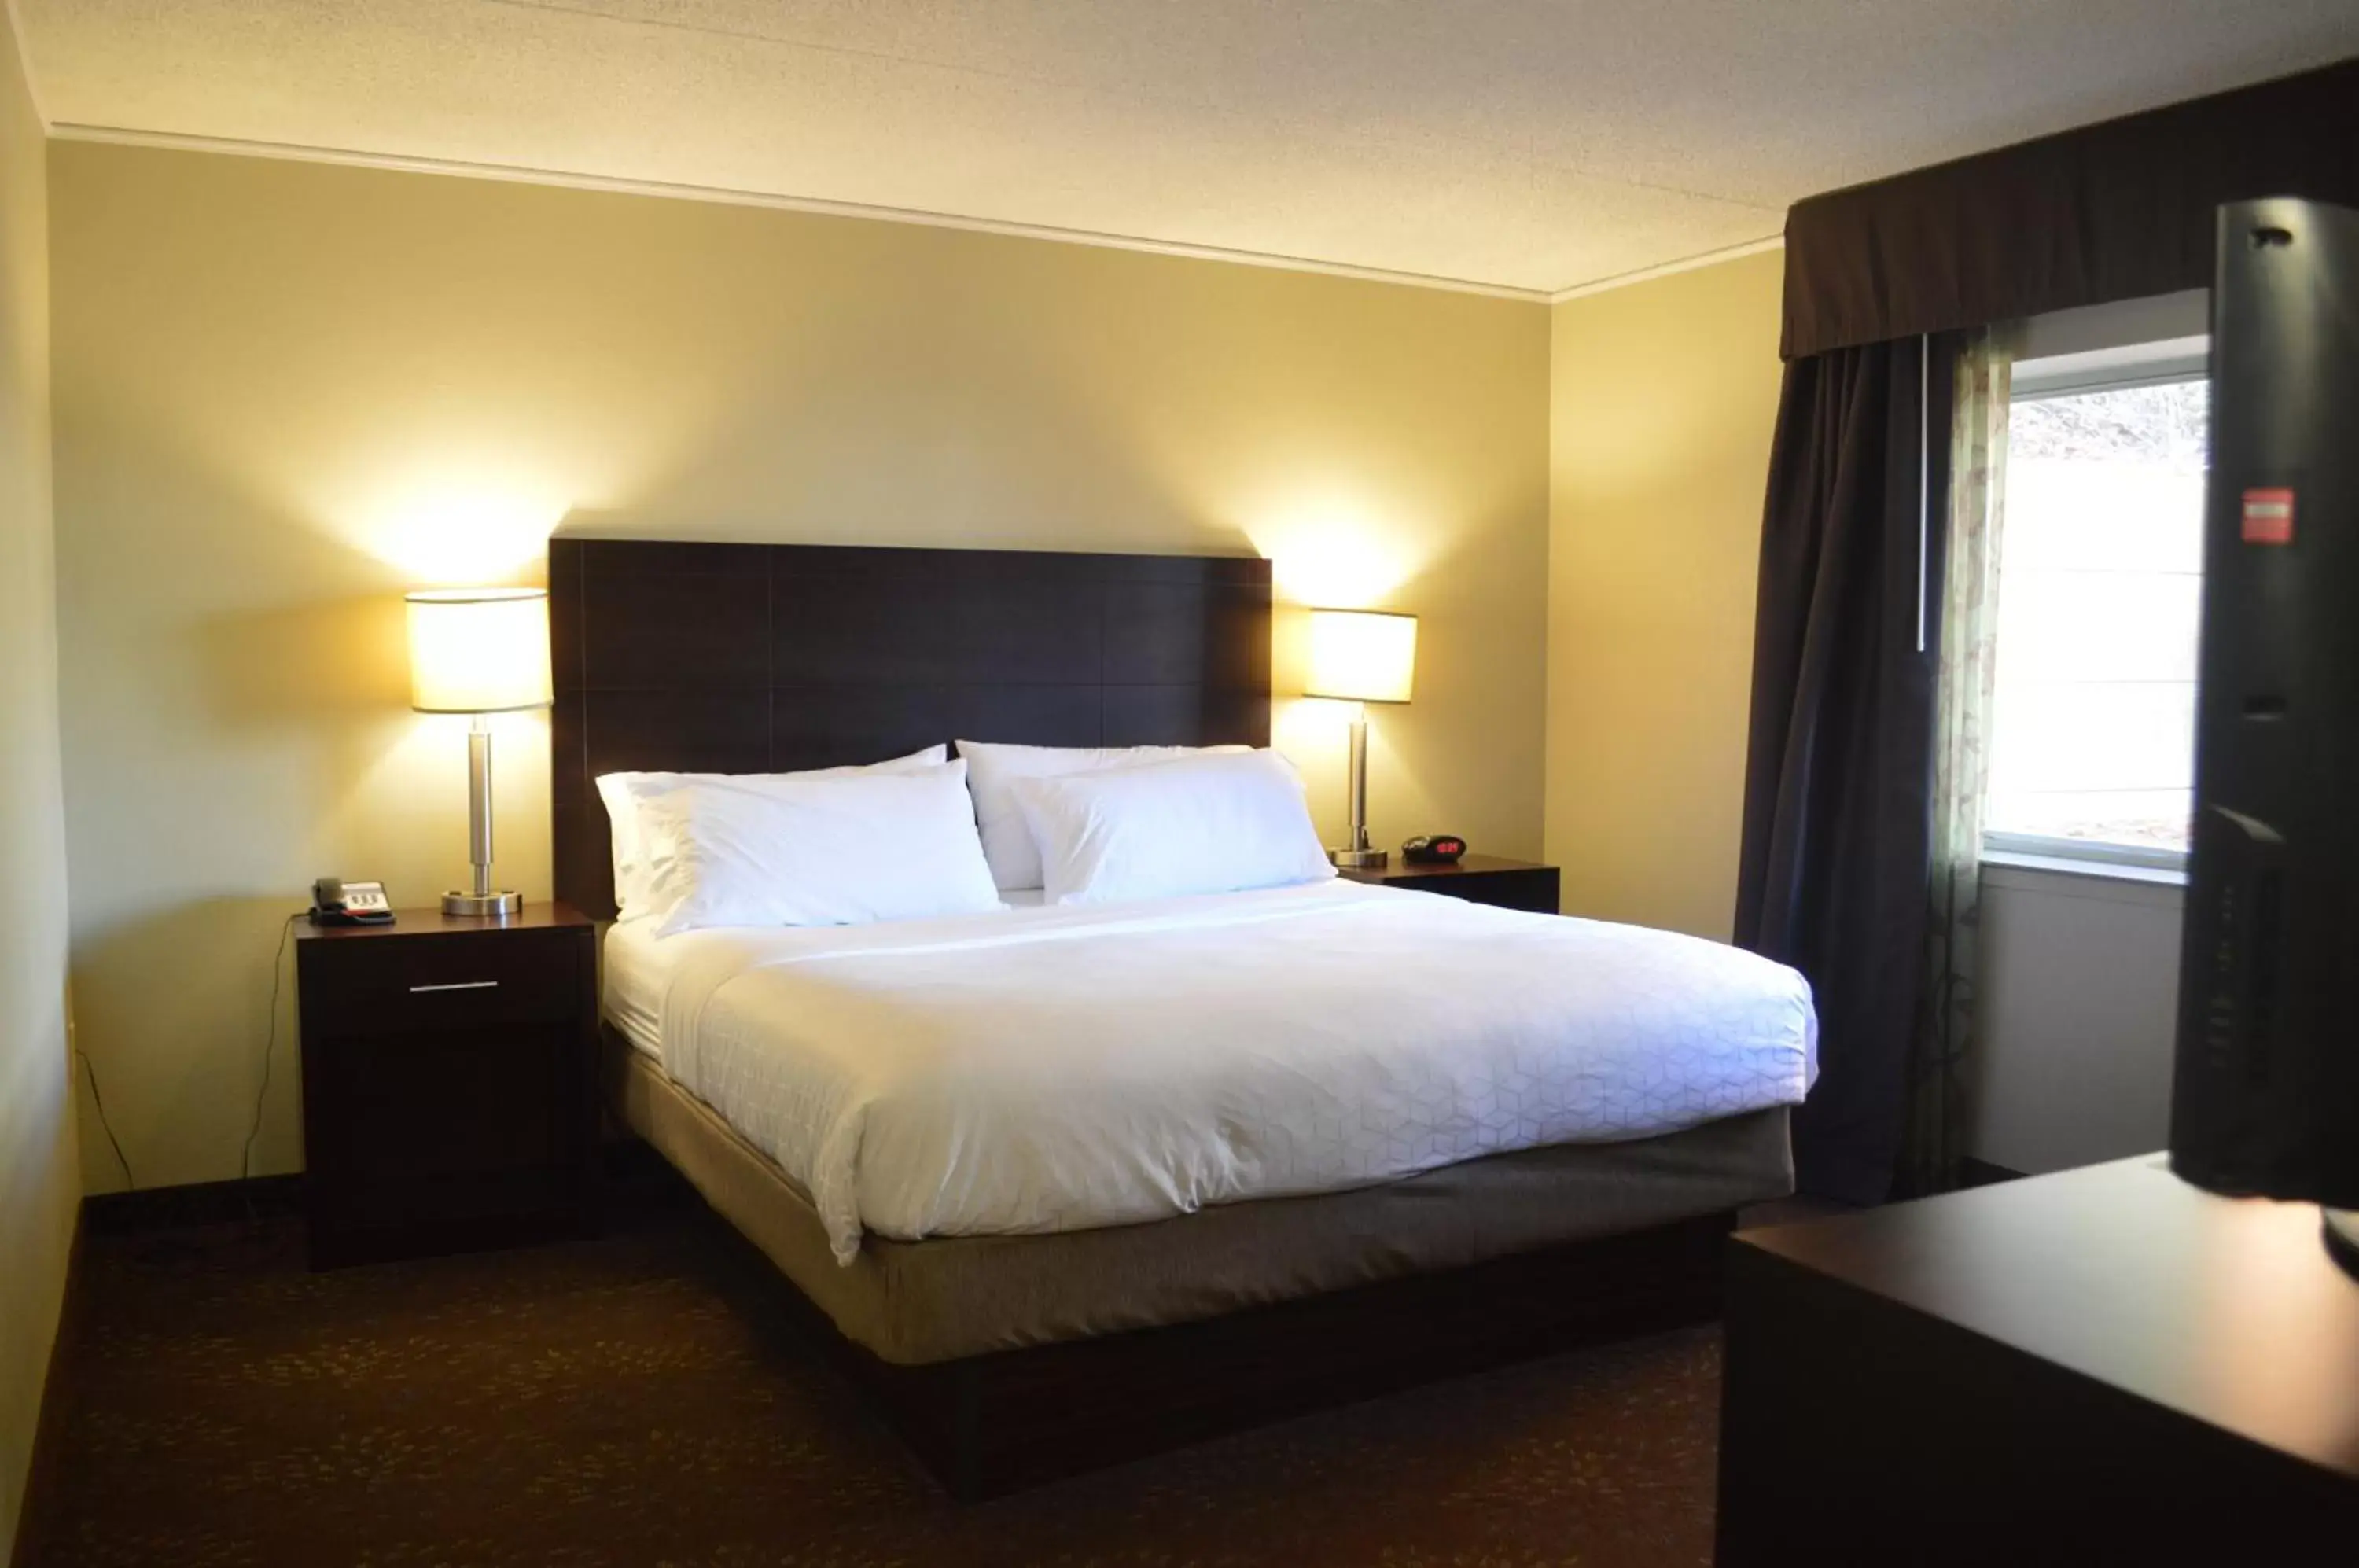 Bed, Room Photo in Holiday Inn Express Hotel & Suites Pittsburgh Airport, an IHG Hotel